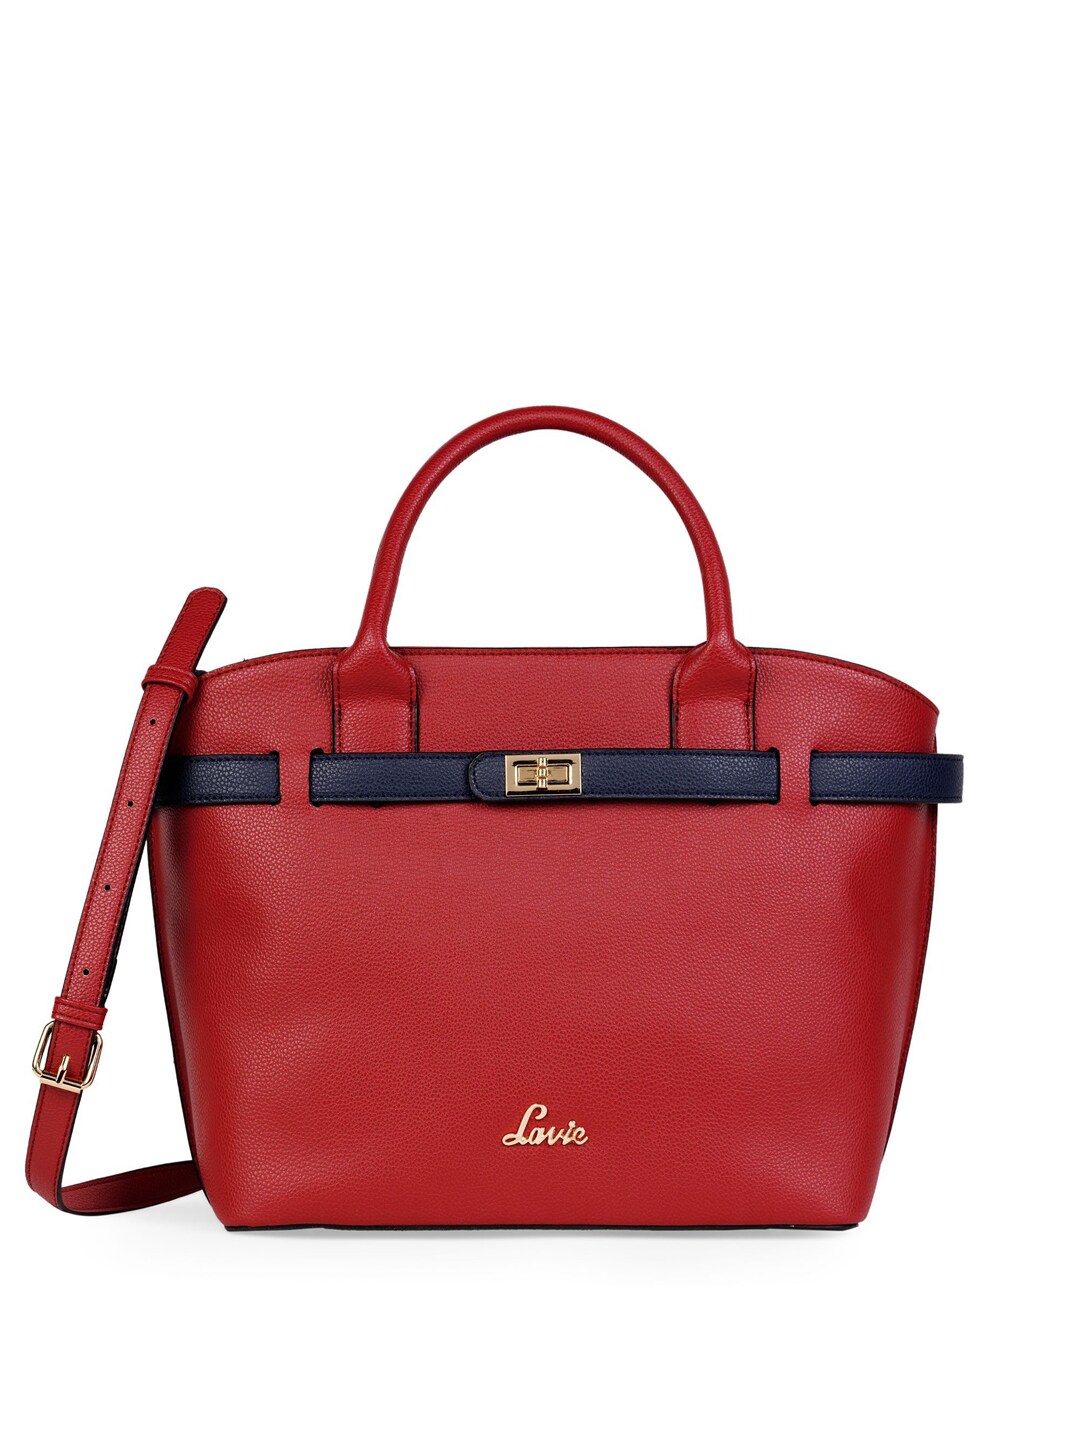 Lavie Red Structured Handheld Bag Price in India